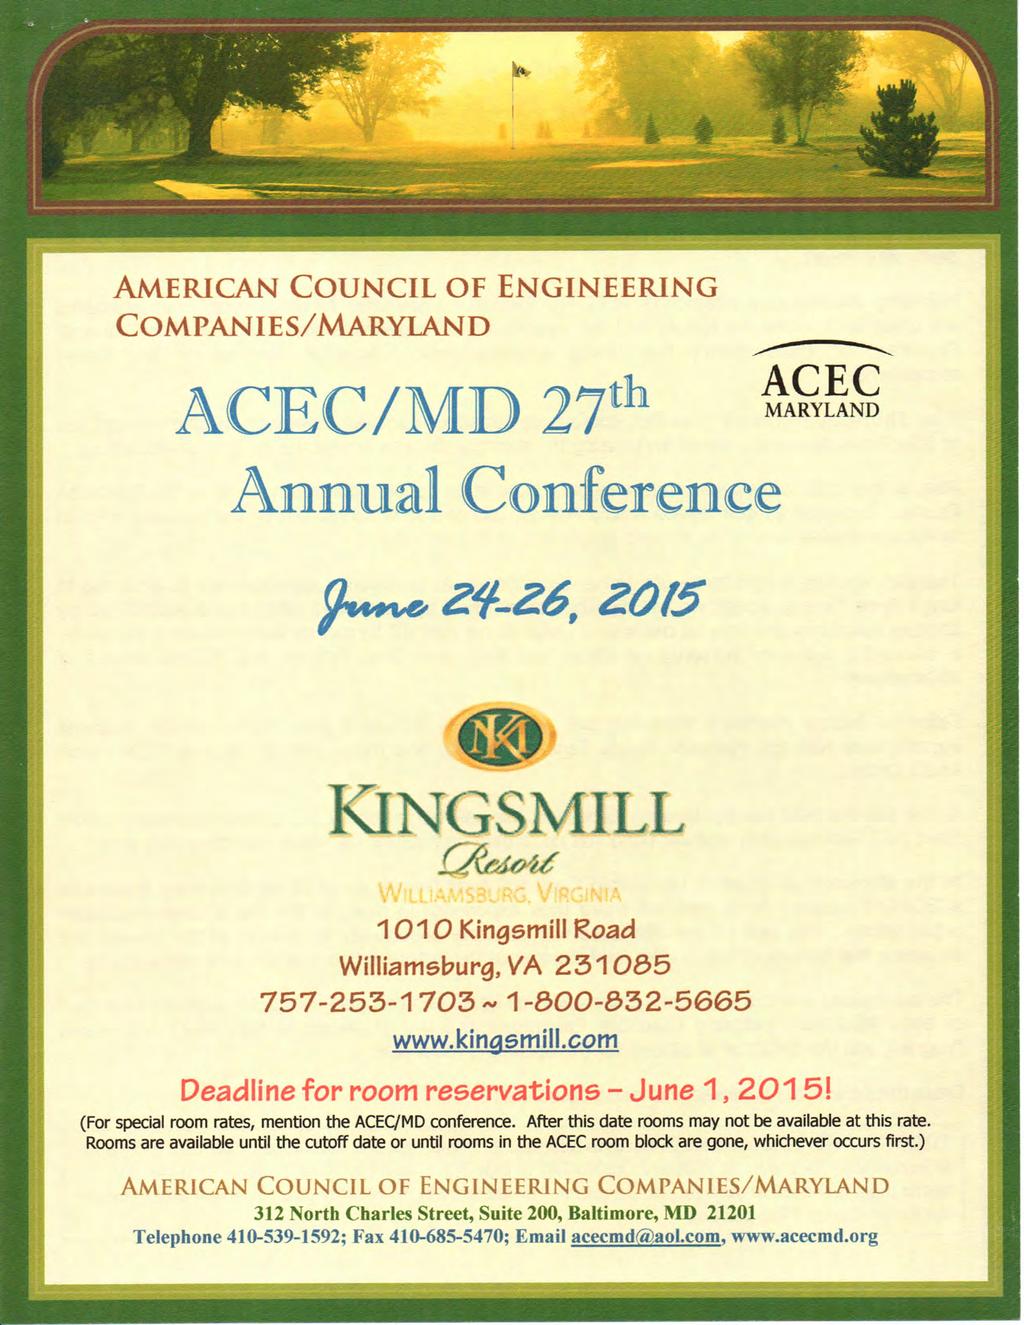 AMERICAN COUNCIL OF ENGINEERING COMPANIES/A4ARYIAND ACEC/MD 27 ACEC MARYLAND Annual Conference KINGSMILL \ f < - V -A loiokingsmillroad Williamsburg, VA 231065 757-253-1703-1 -600-632-5665 www.